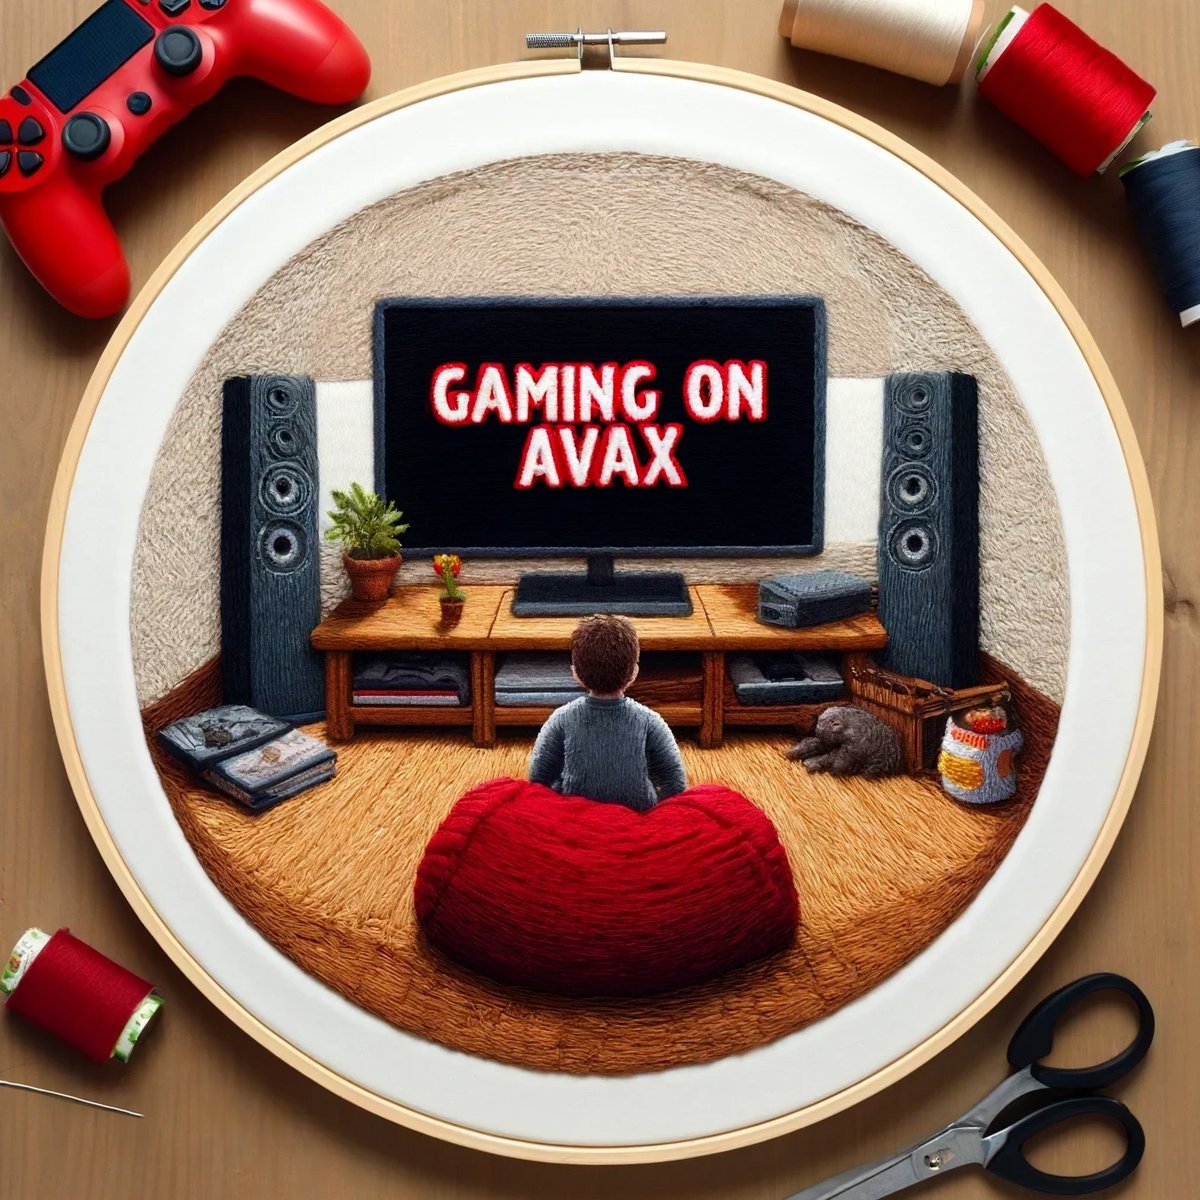 This weekend you should relax. Touch grass. Do some needlepoint. But not before catching up on Avalanche Gaming news. 🎮🧵👇